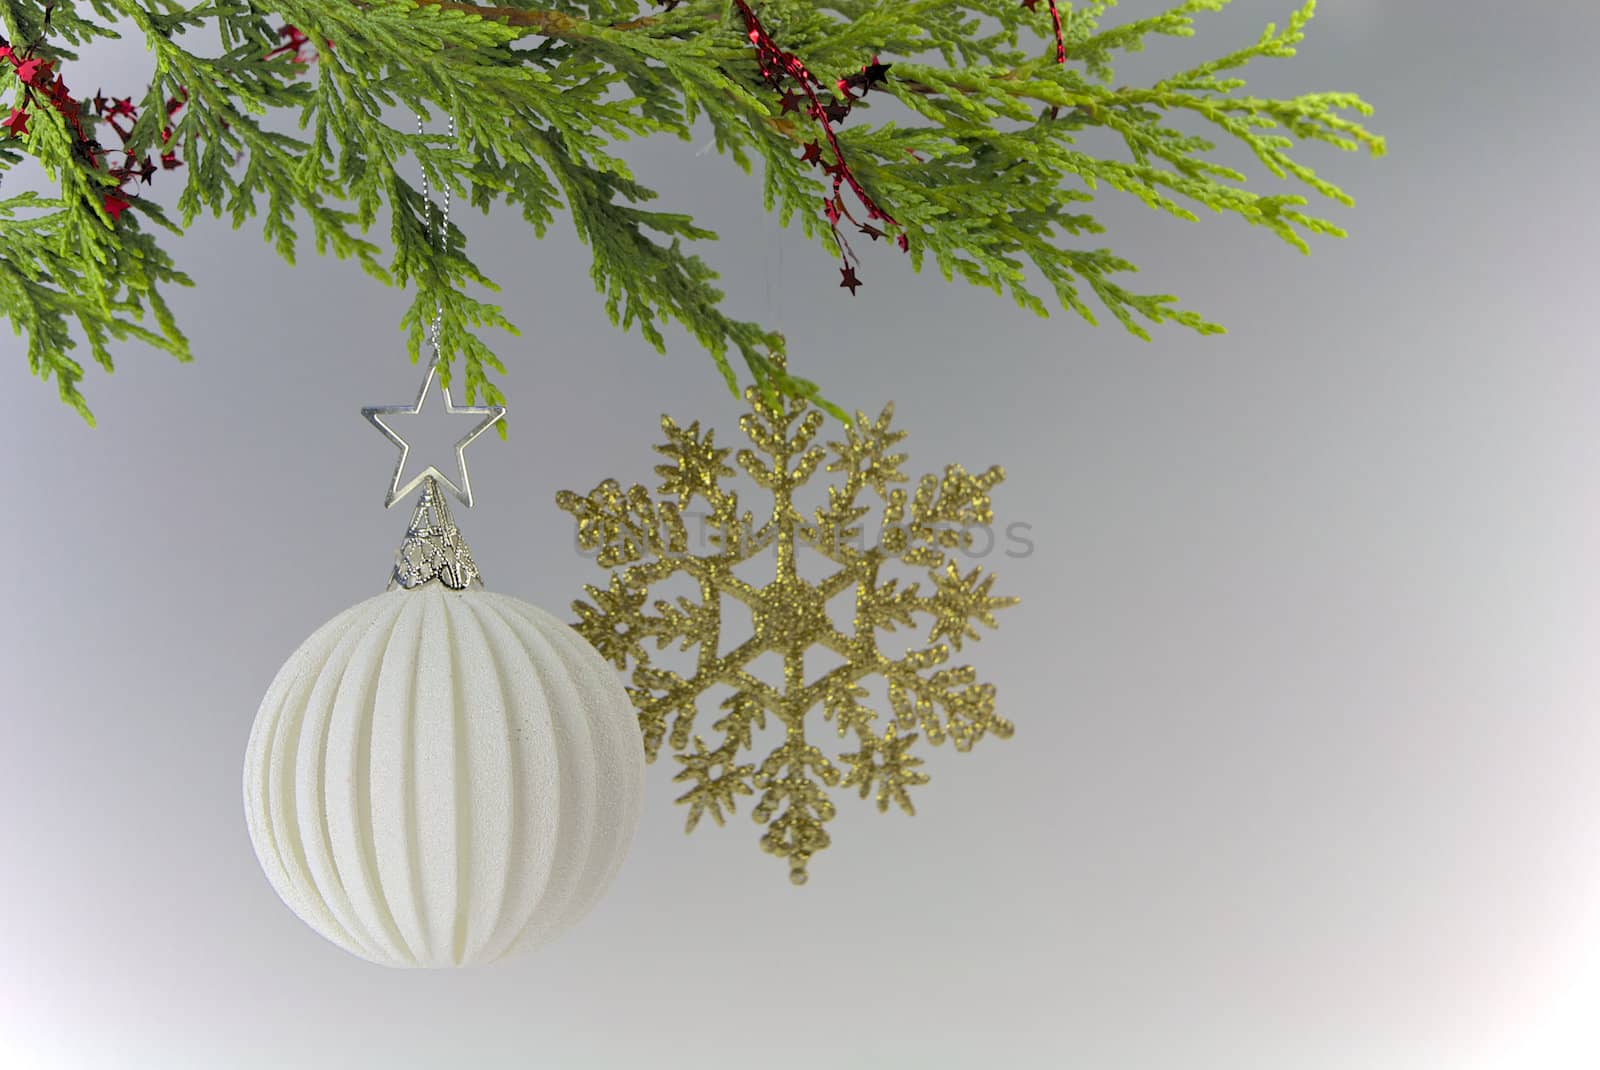 Christmas Decoration Hanging From a Tree on White Background